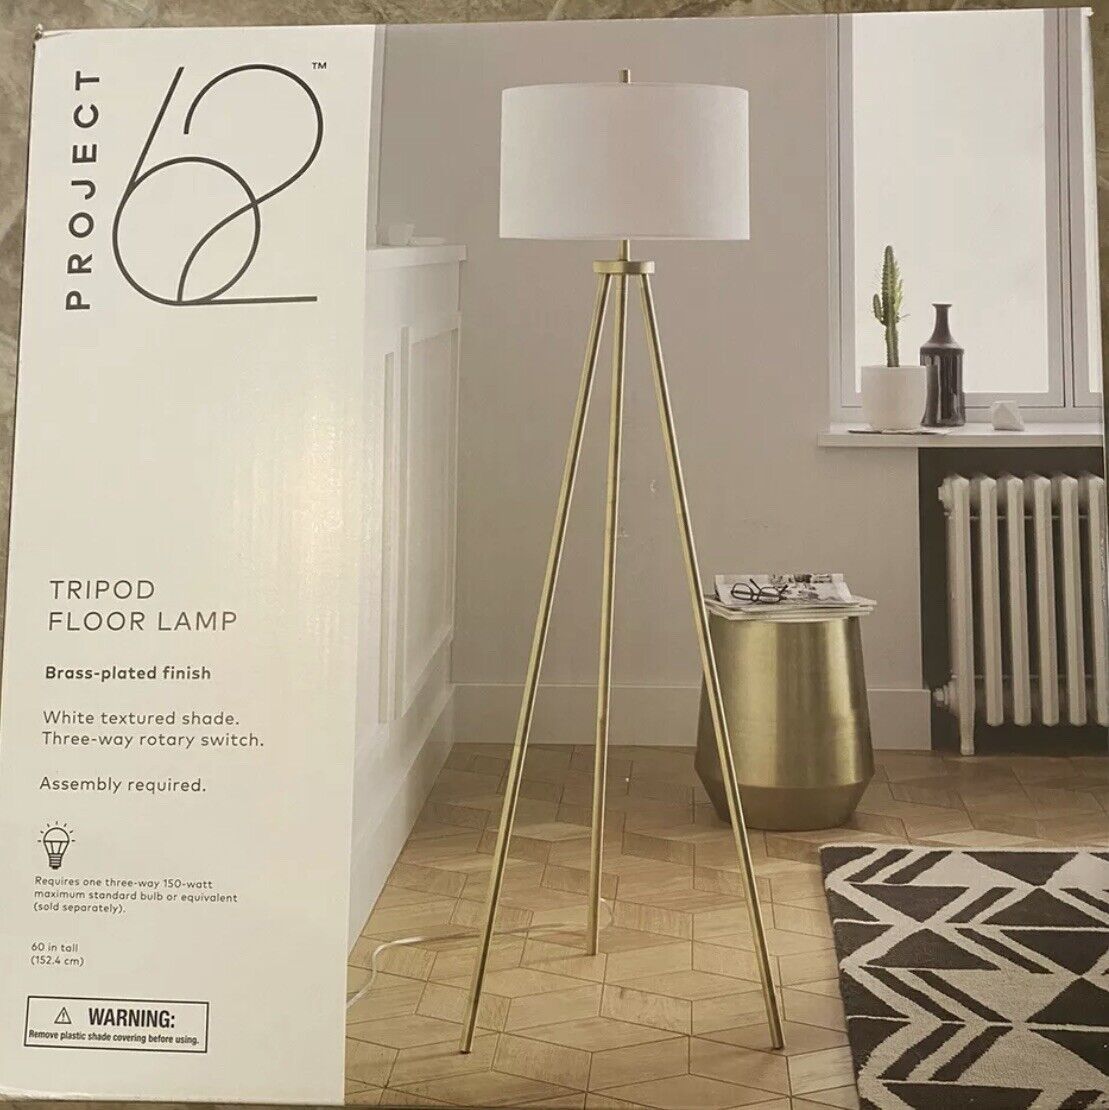 Project 62 Tripod Floor Lamp 🆕distressed Box🆕 | Ebay With Beeswax Finish Floor Lamps (View 13 of 15)